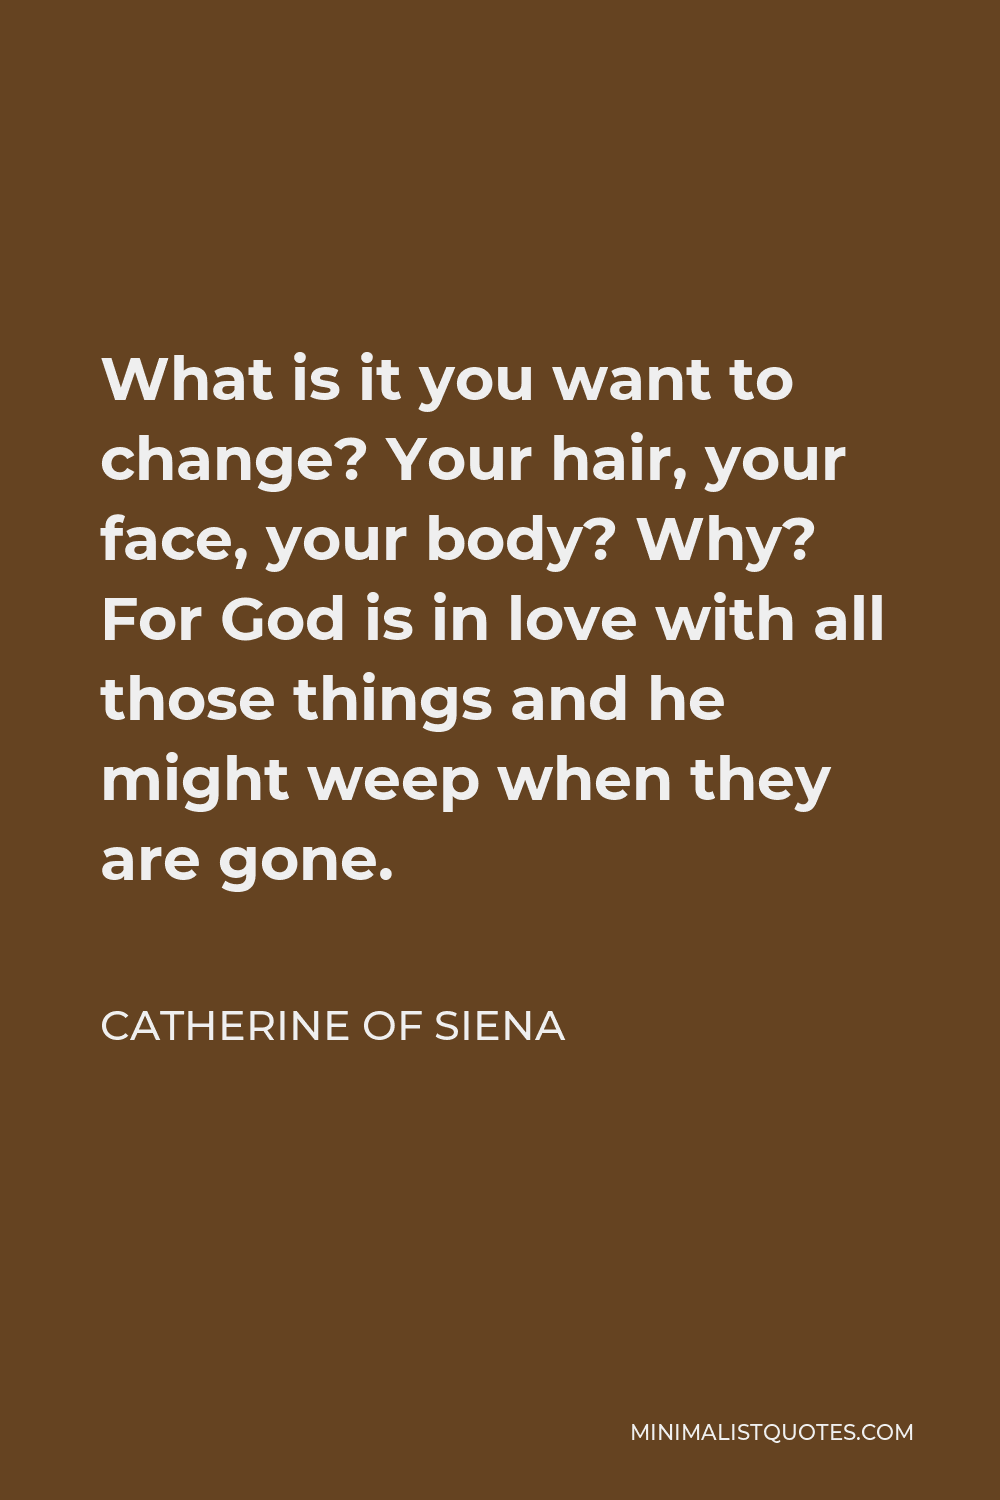 Catherine of Siena Quote - What is it you want to change? Your hair, your face, your body? Why? For God is in love with all those things and he might weep when they are gone.